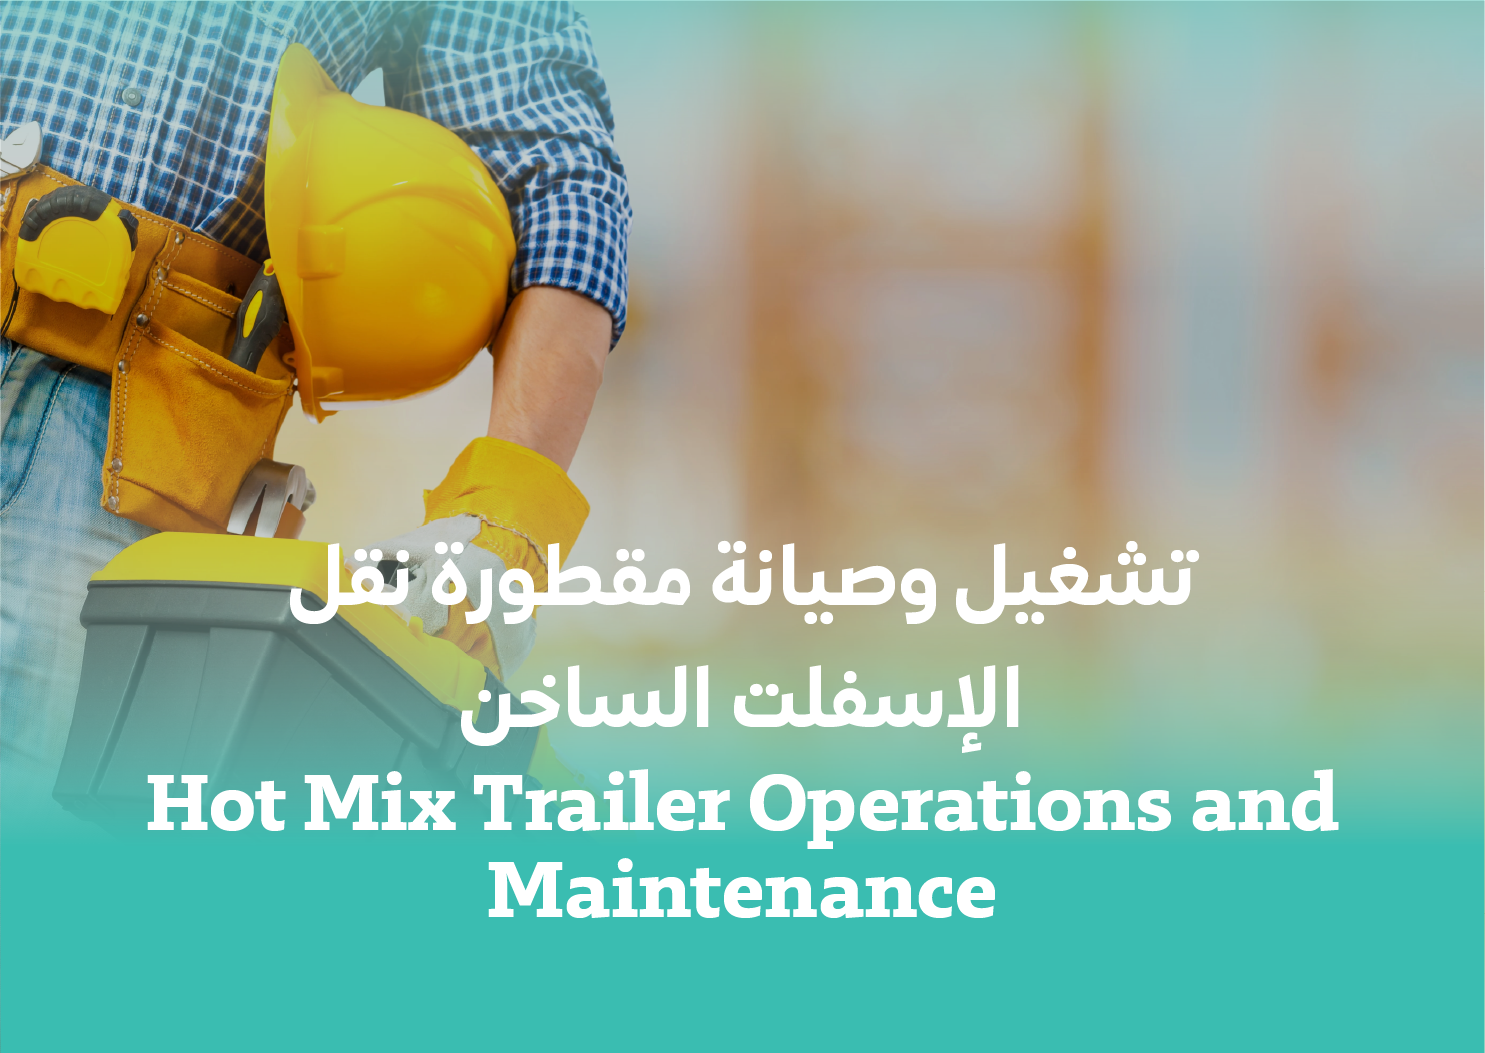 Hot Mix Trailer Operations and Maintenance